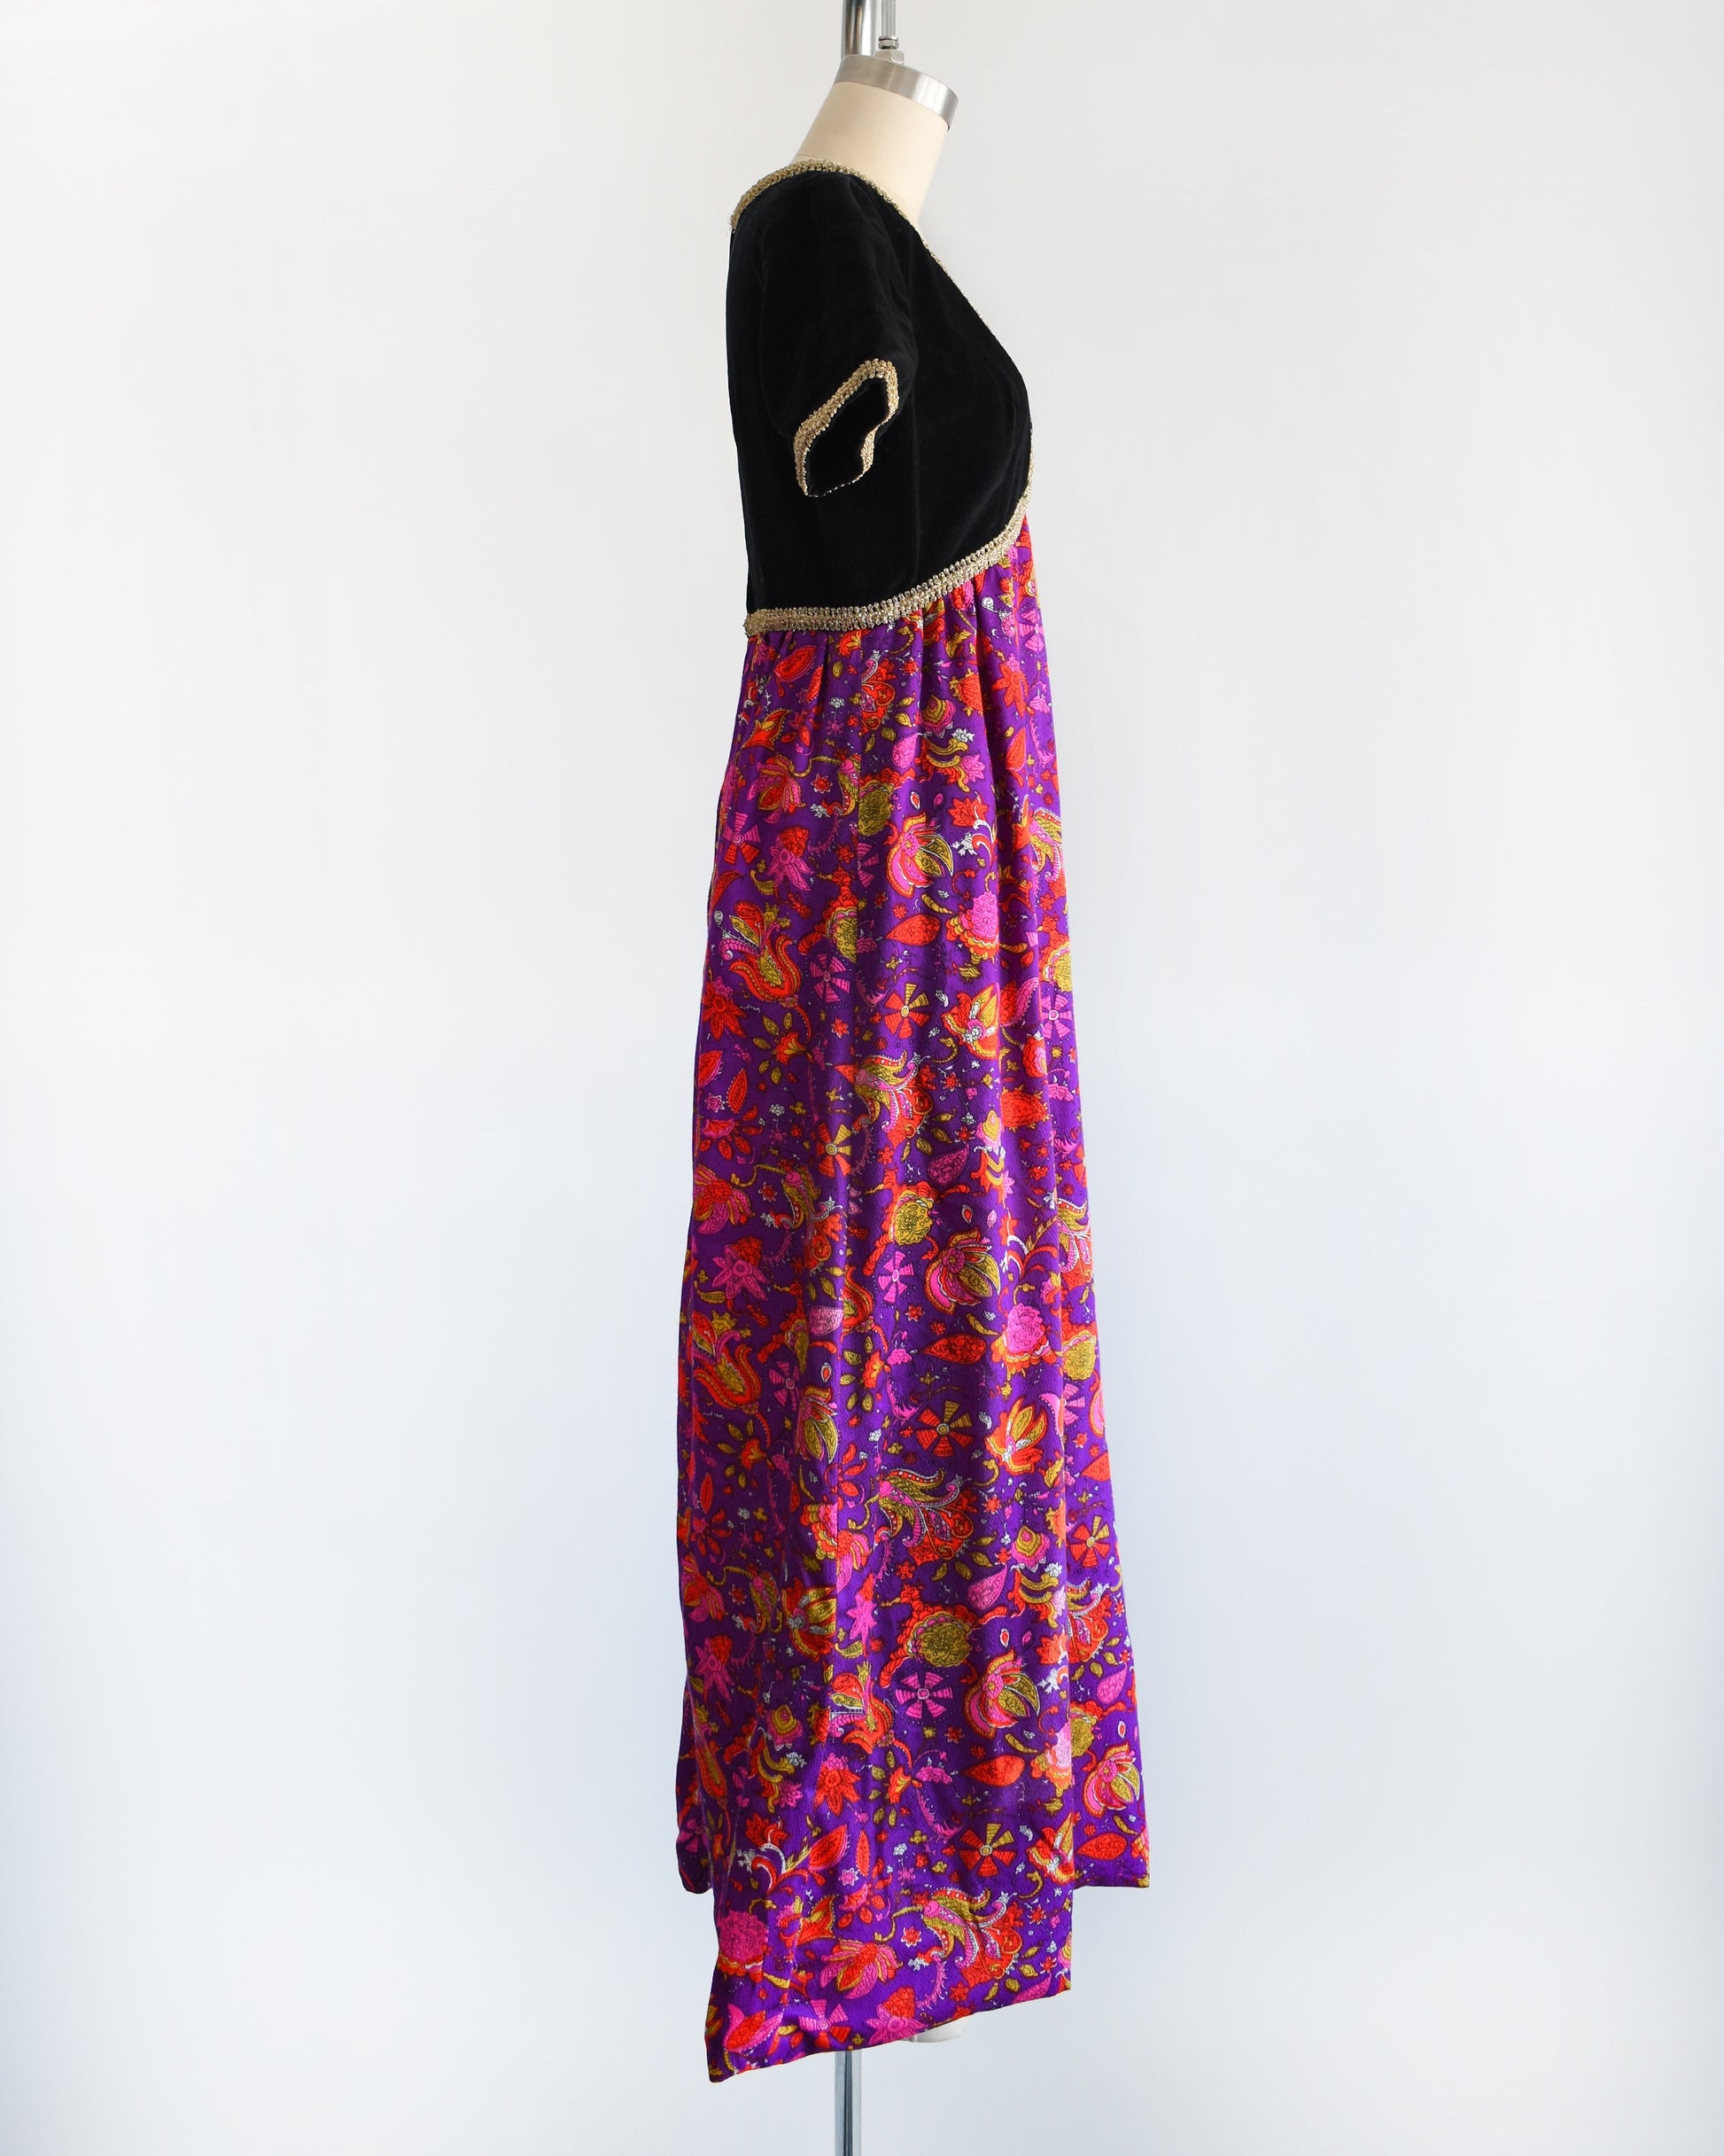 Side view of a vintage 60s/70s maxi dress that has a black velvet bodice with gold metallic ribbon trim, along with a purple skirt with pink, orange, yellow, and white floral print.